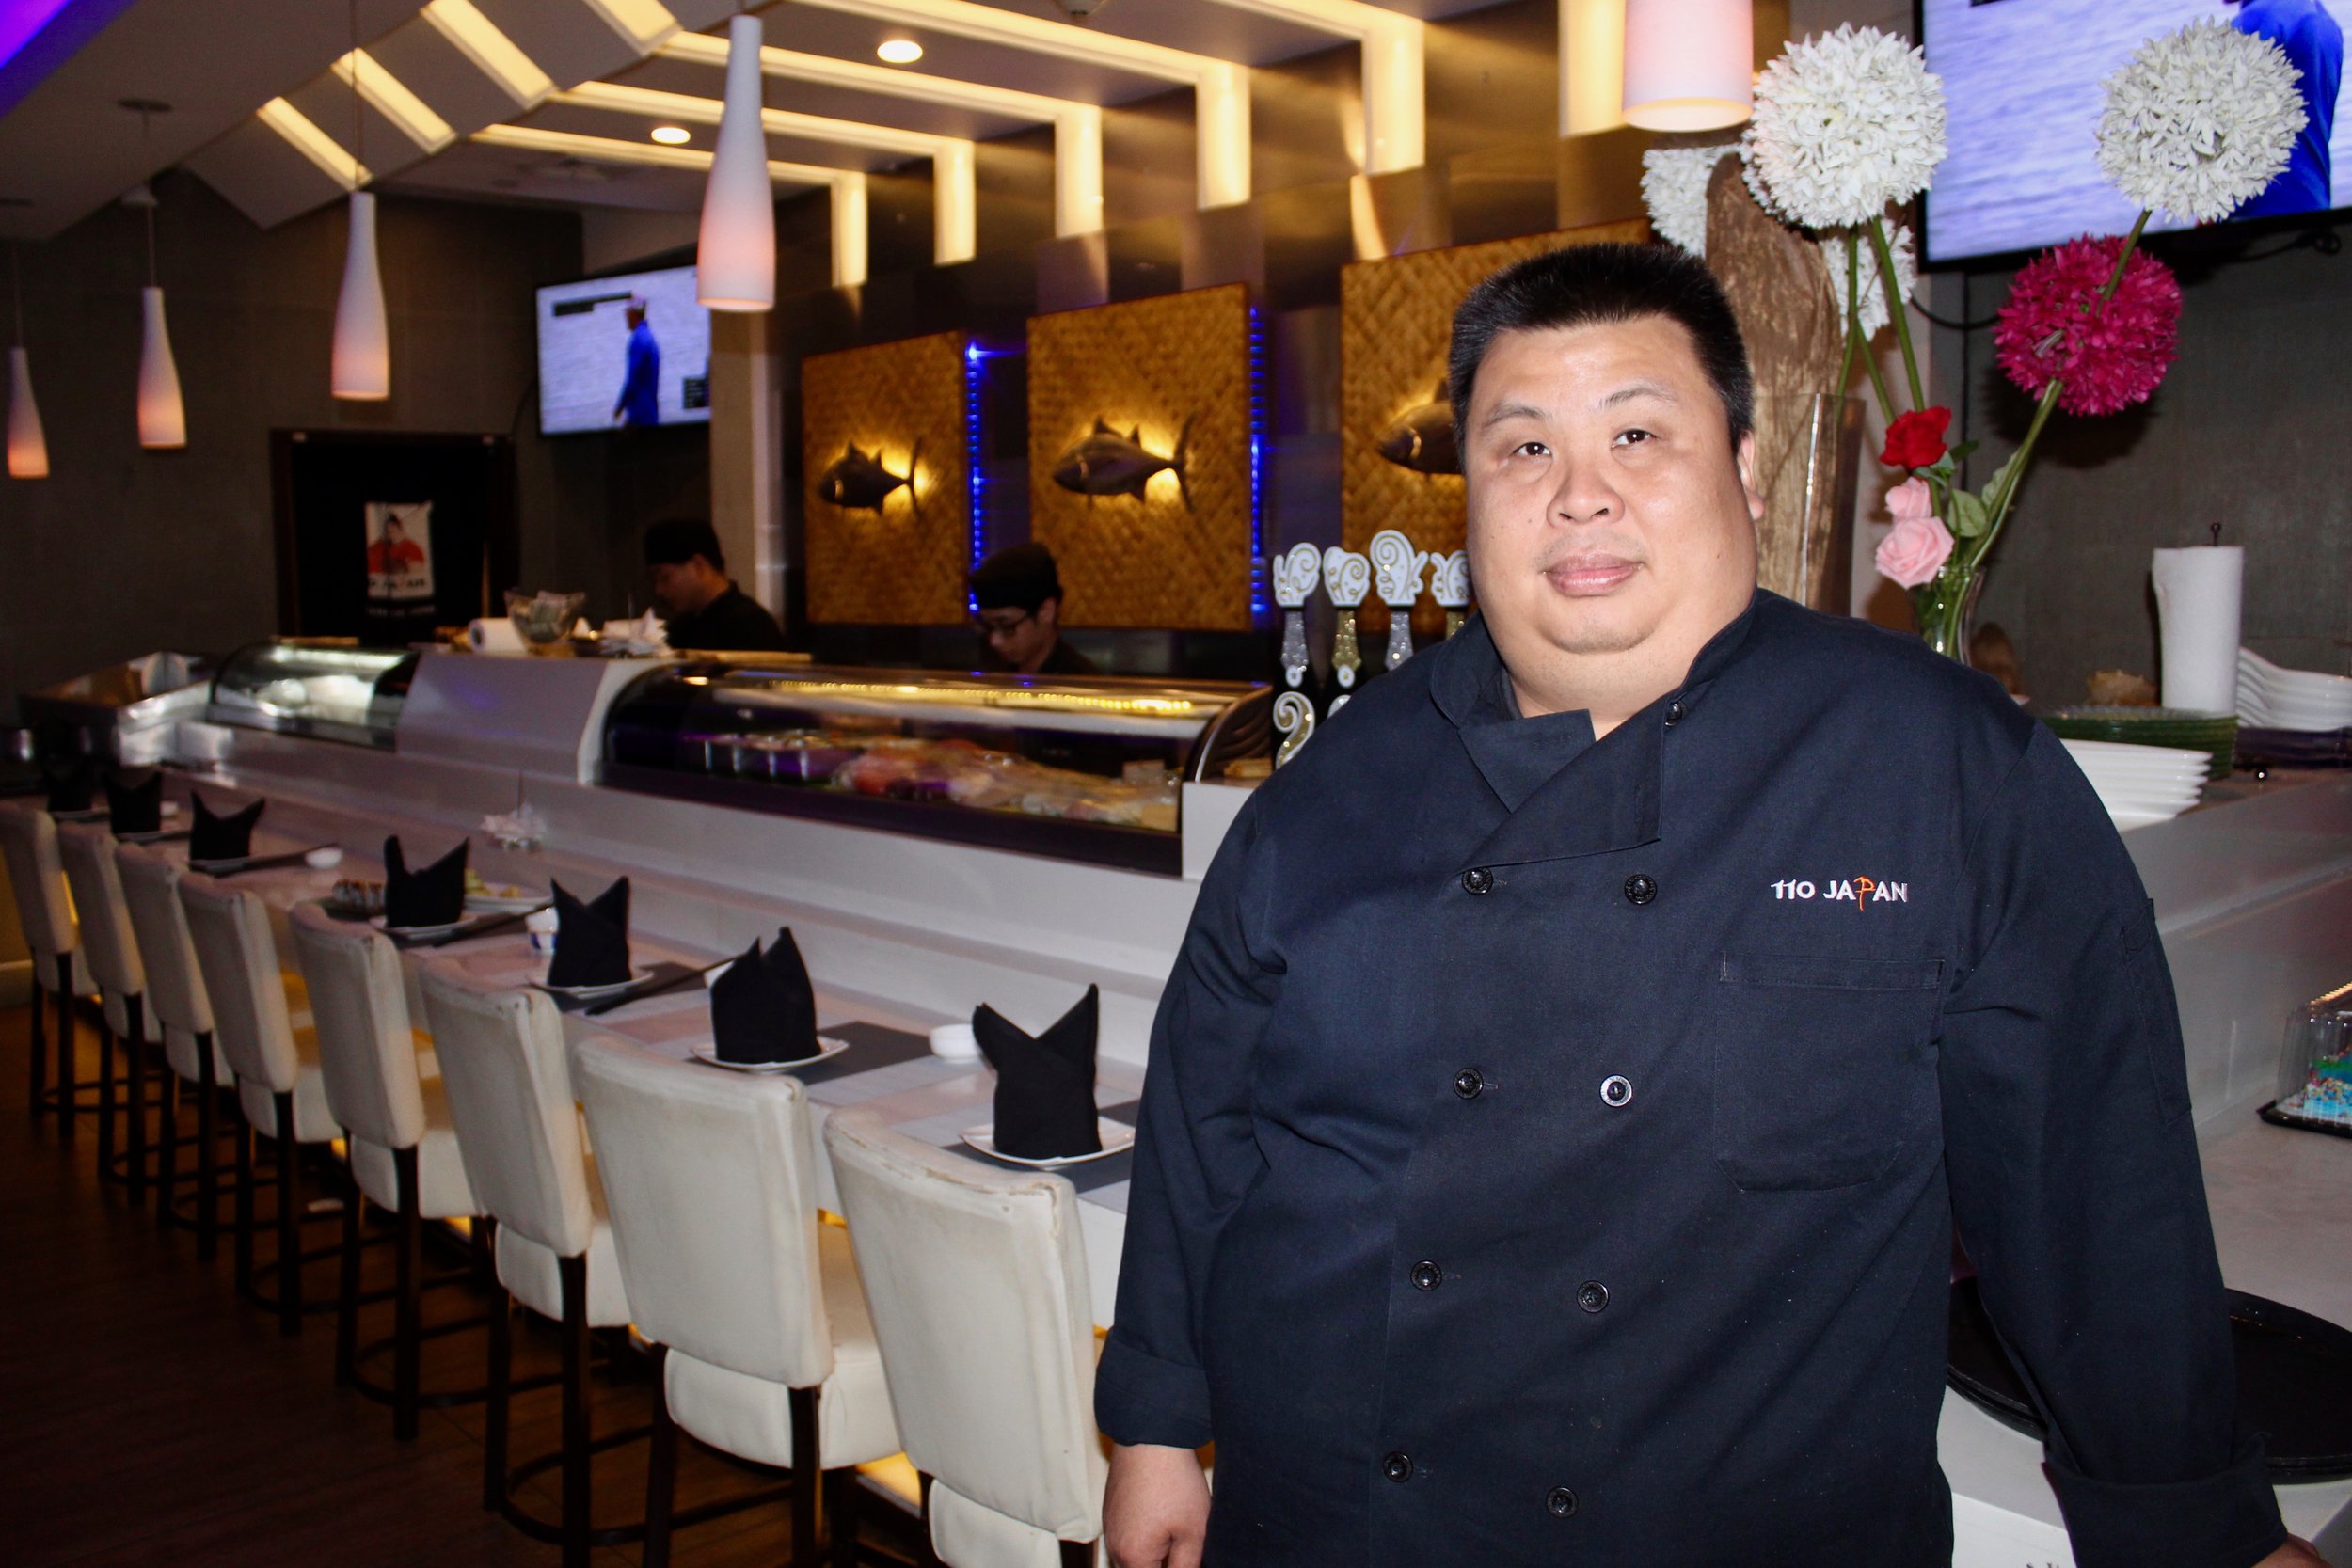  Chef Chee Meng So’s fusion dishes pull from his time spent in Malaysia, Japan and Singapore. 